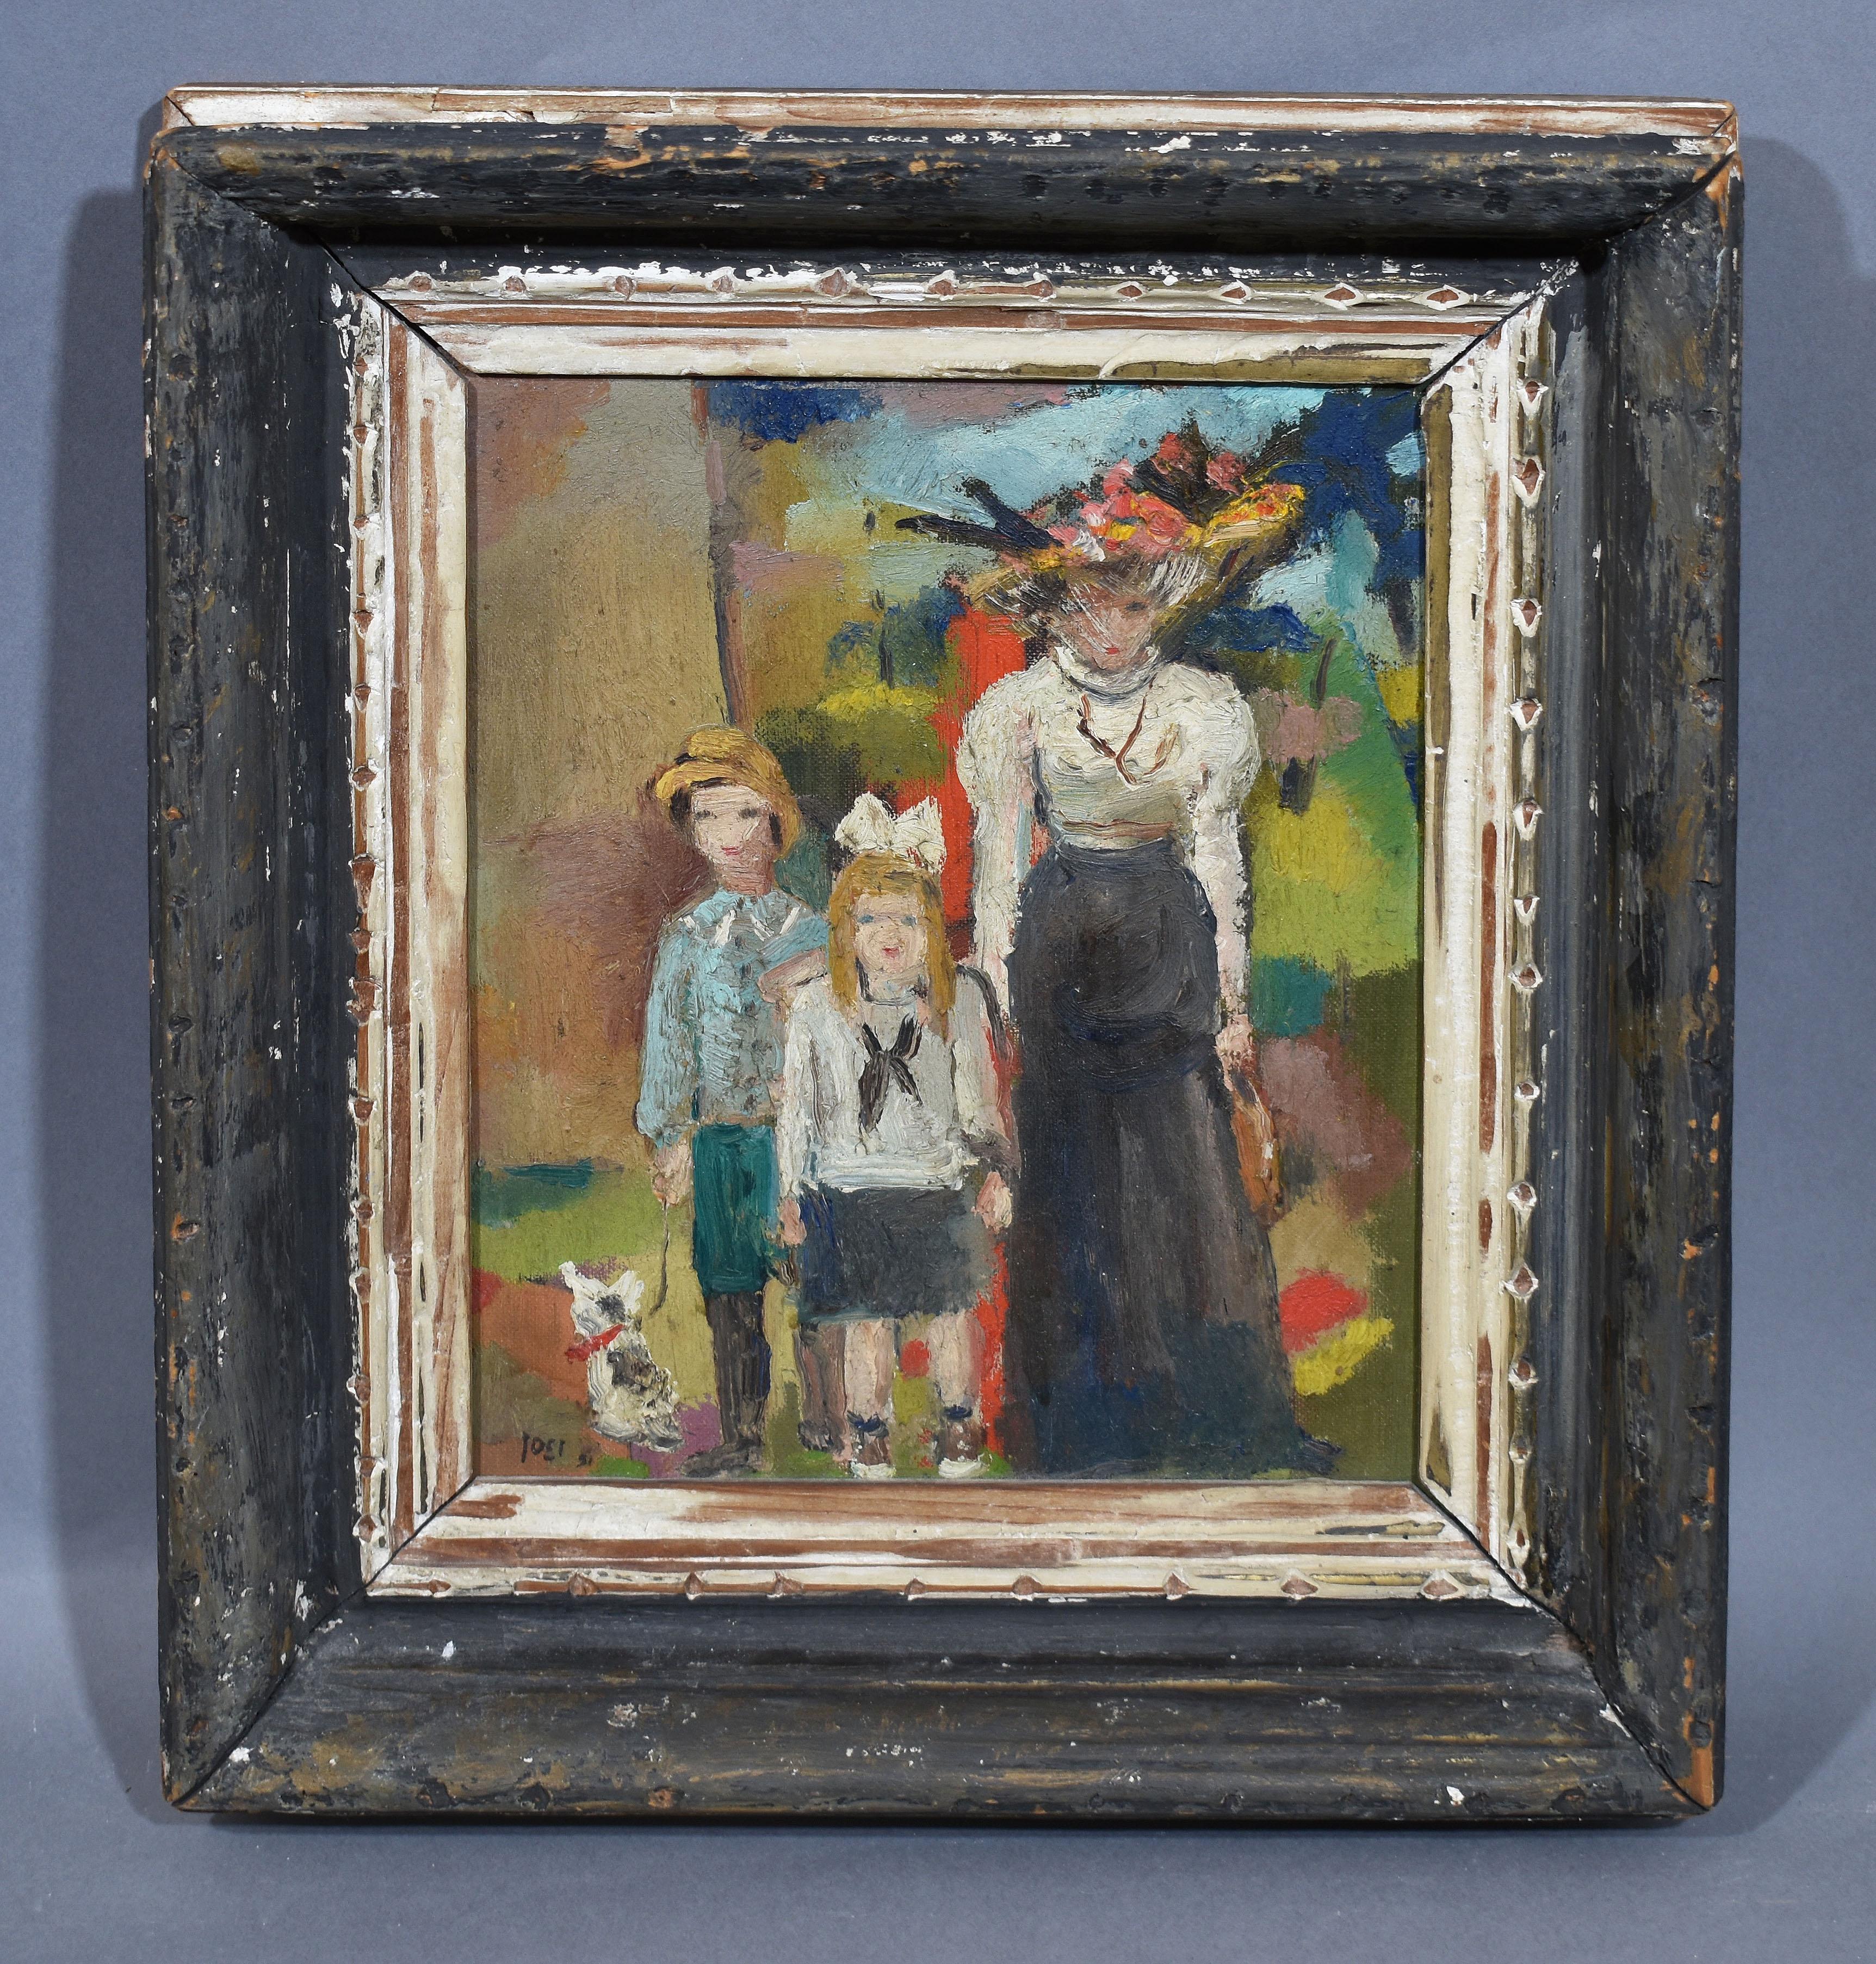 Paris Modern School, Impressionist Family Portrait, Signed Original Oil Painting - Black Figurative Painting by Unknown